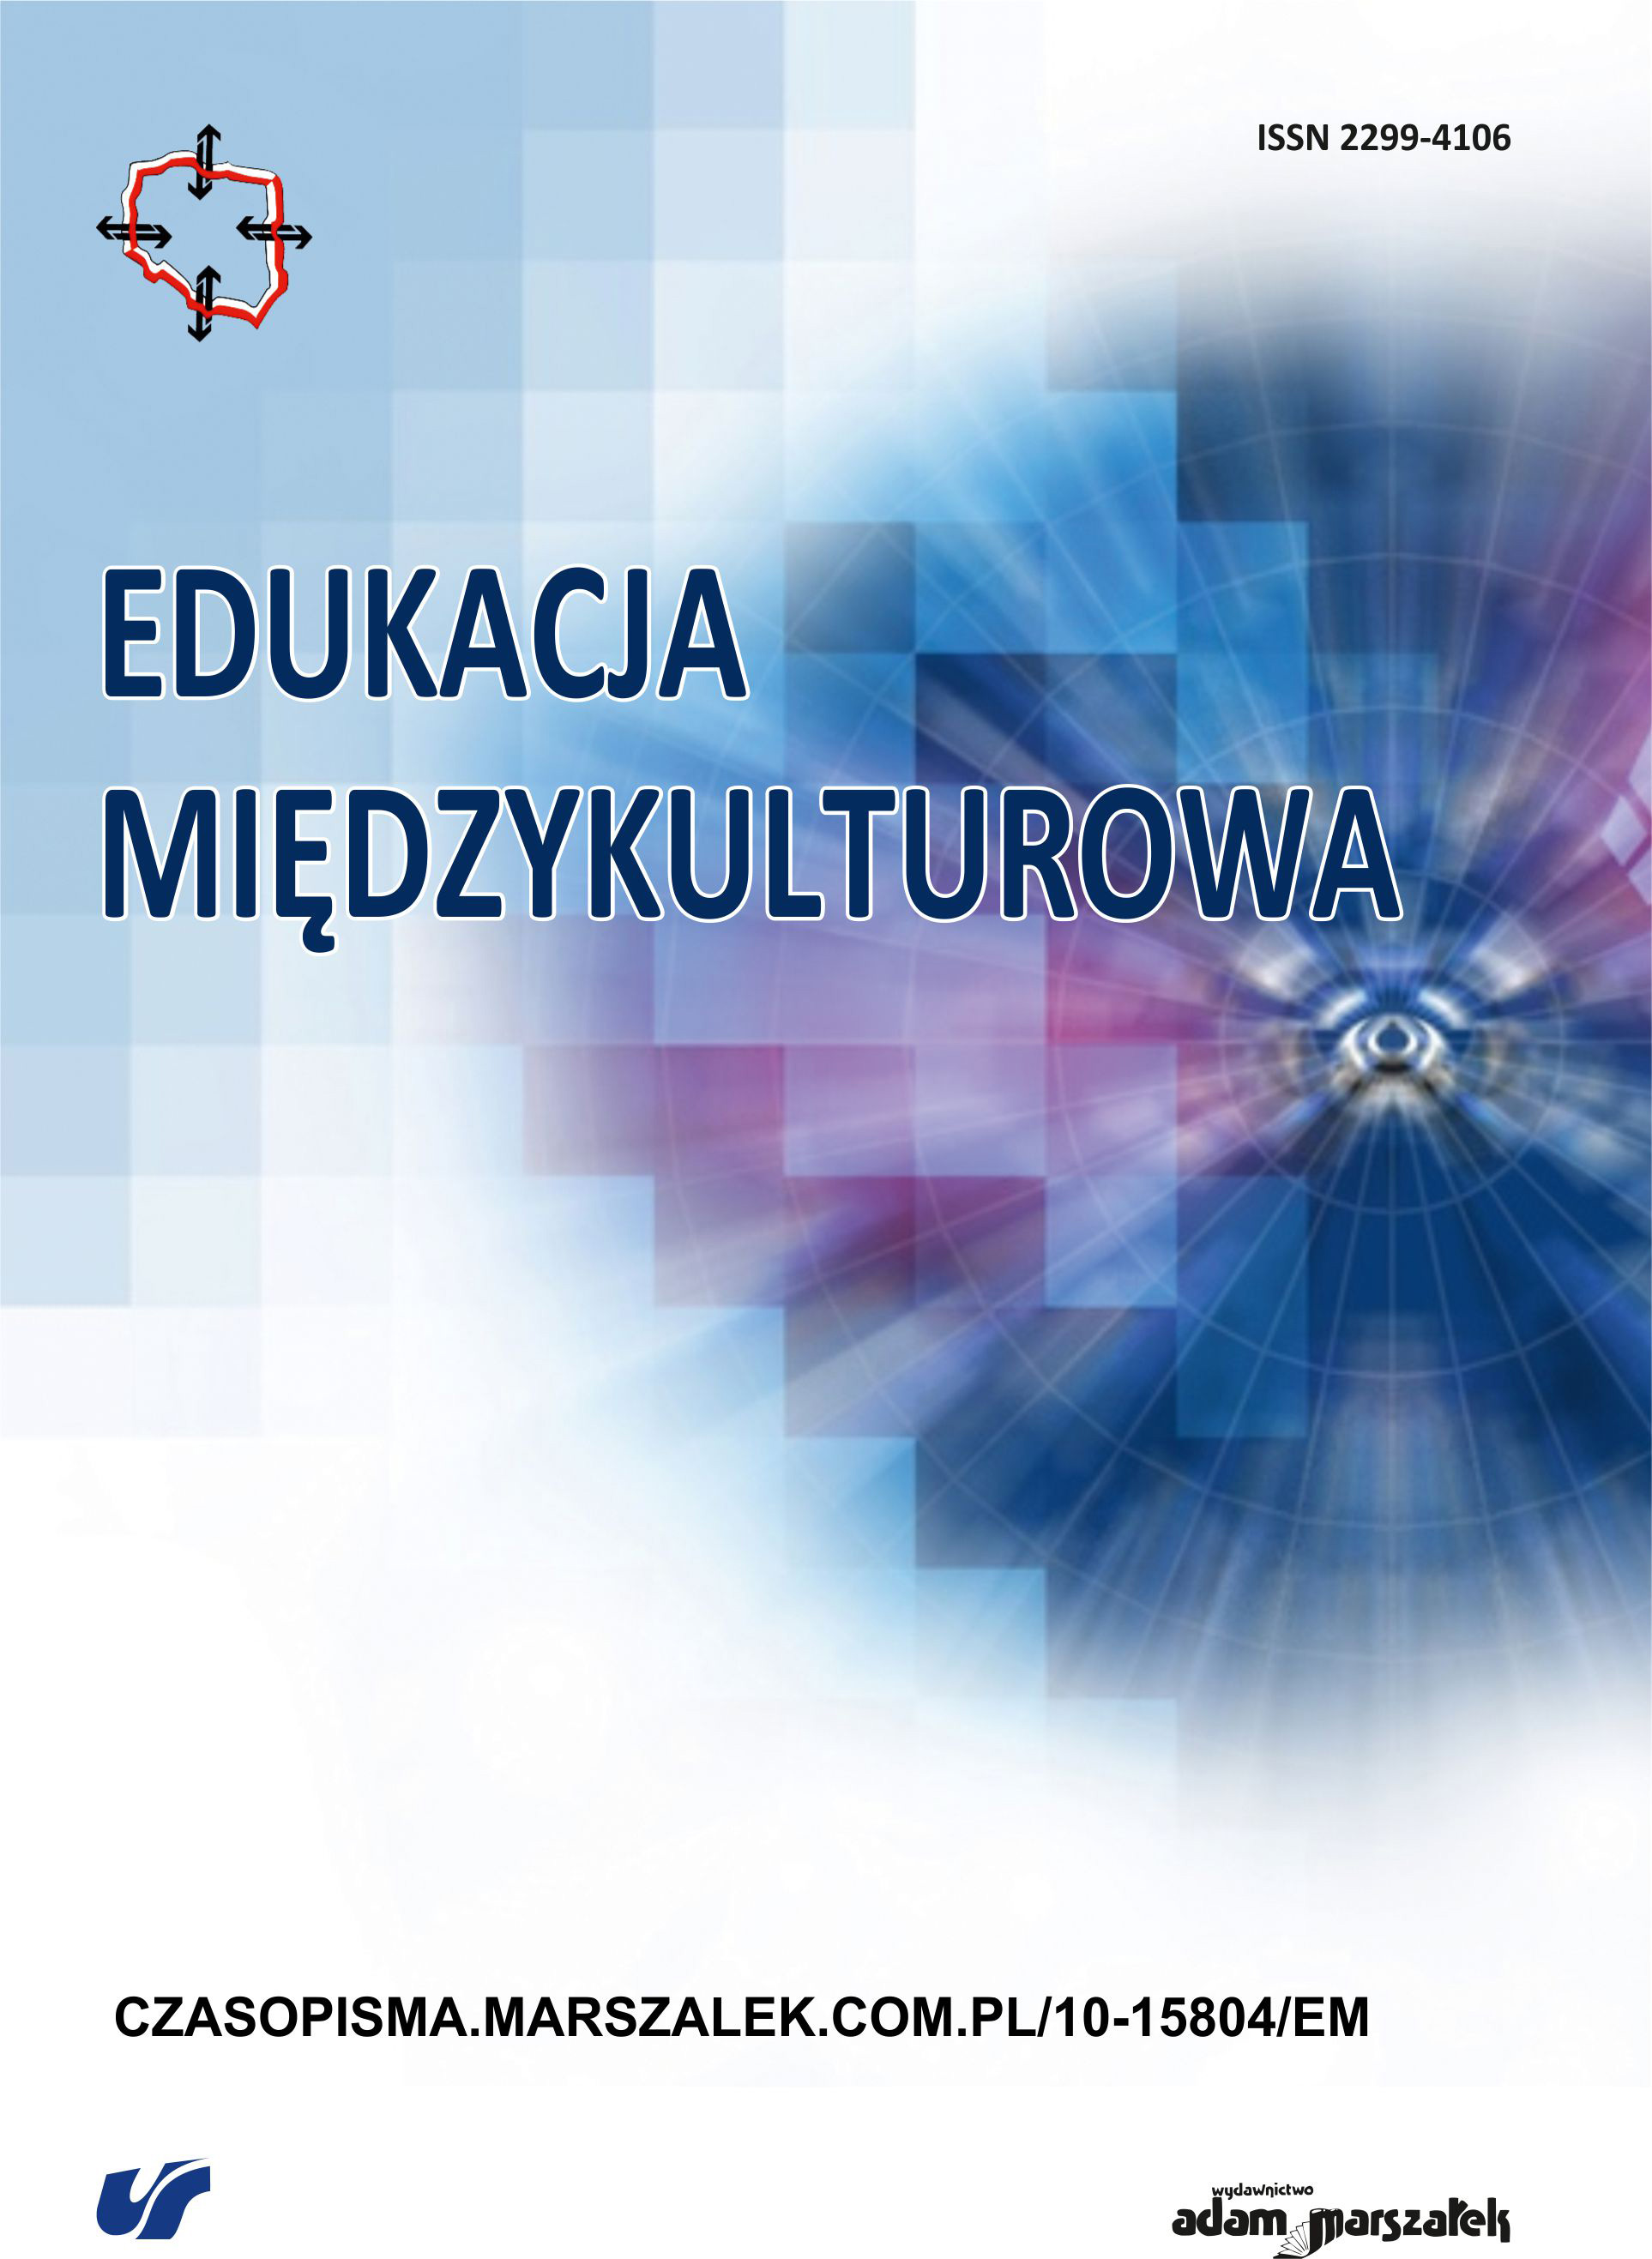 Retrospective analysis of an intercultural paradigmatic shift in the philosophical and educational thought in Ukraine in the second half of the 19th and the beginning of the 20th century